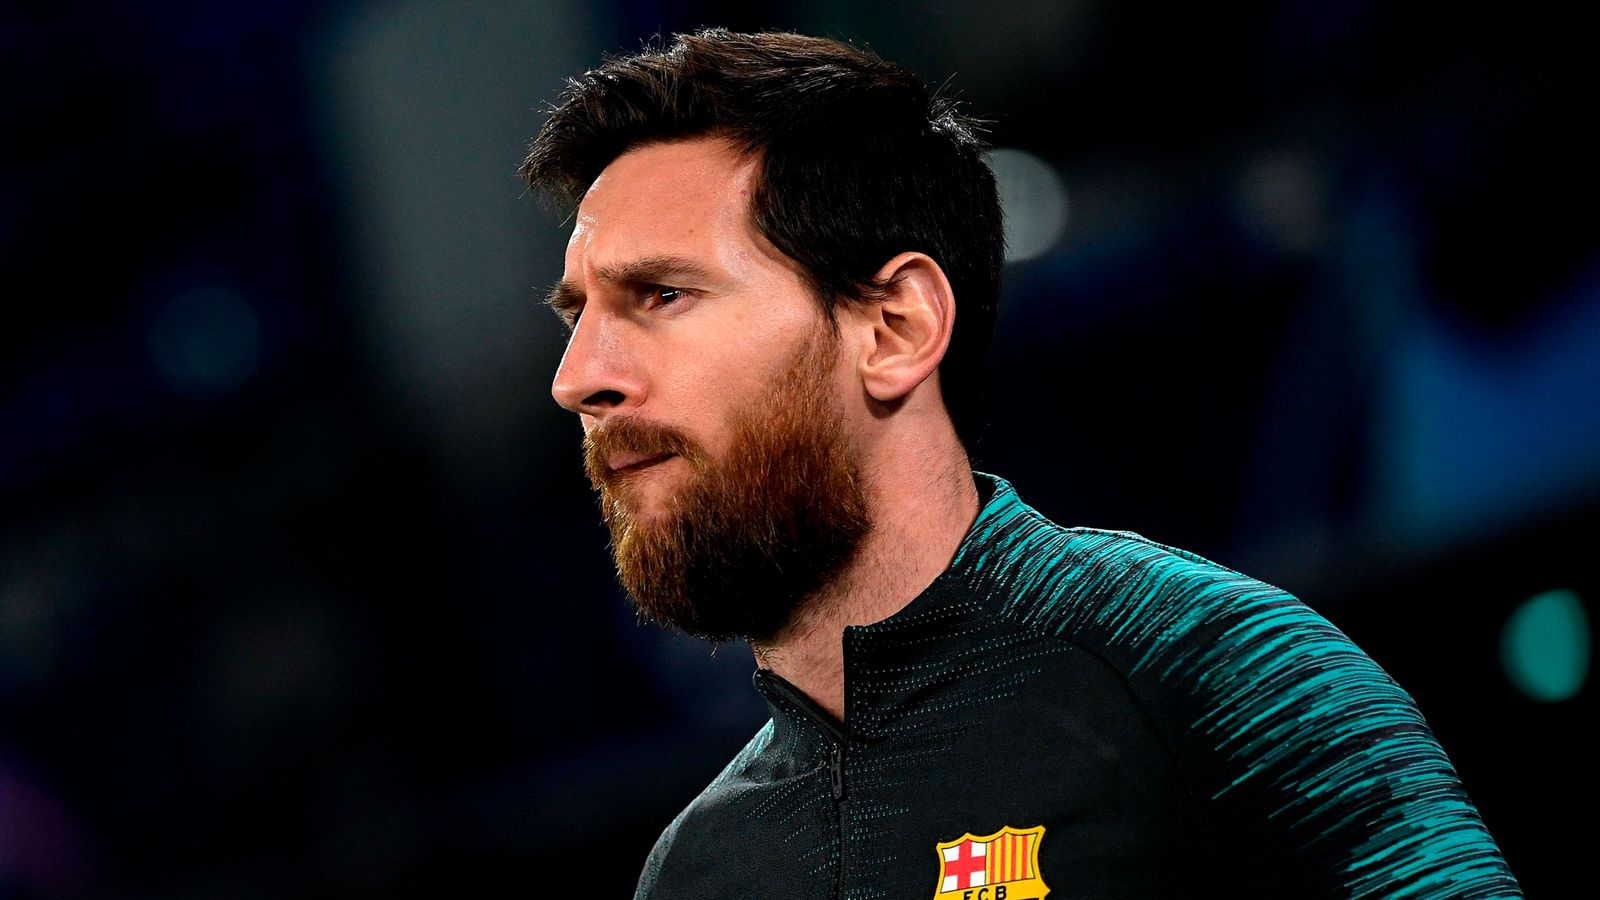 Messi tempts Barcelona: I don't know what's next for me